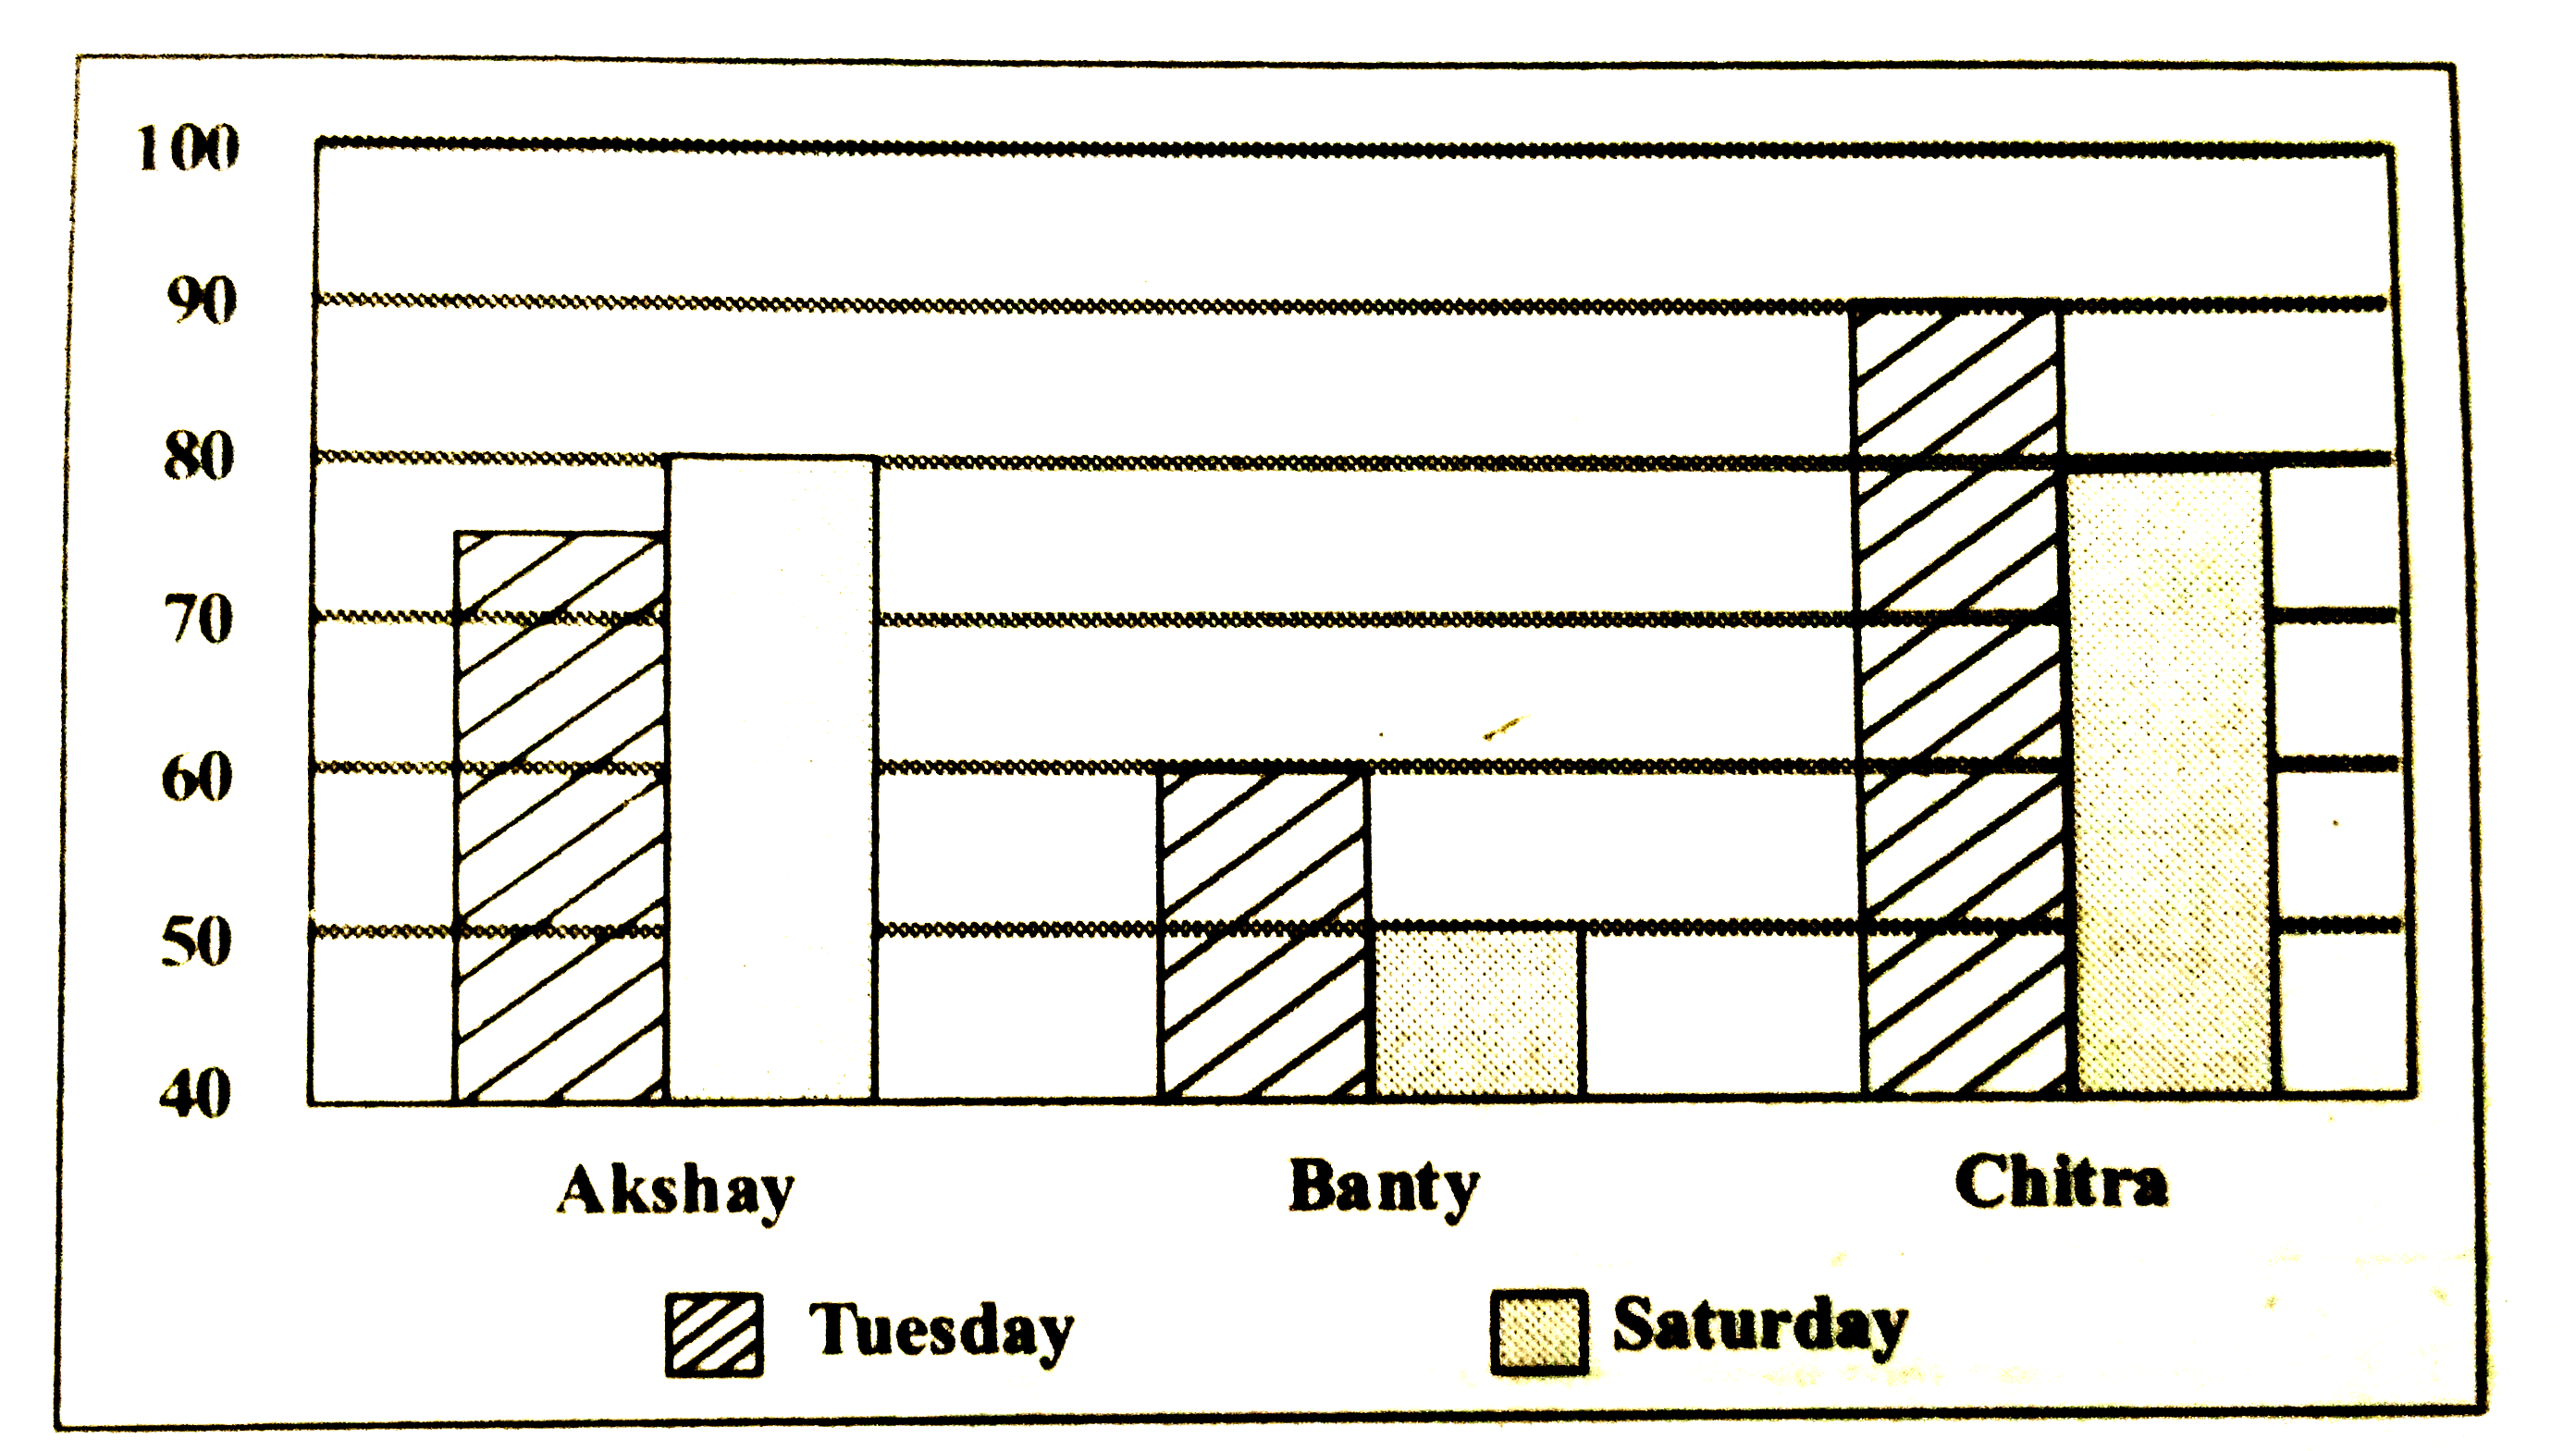 If 20% calls increases from Tuesday to Starday for Banty and Chitra and average number of query resolved by them received by Chitra is how much more than that of received on Tuesday by her.